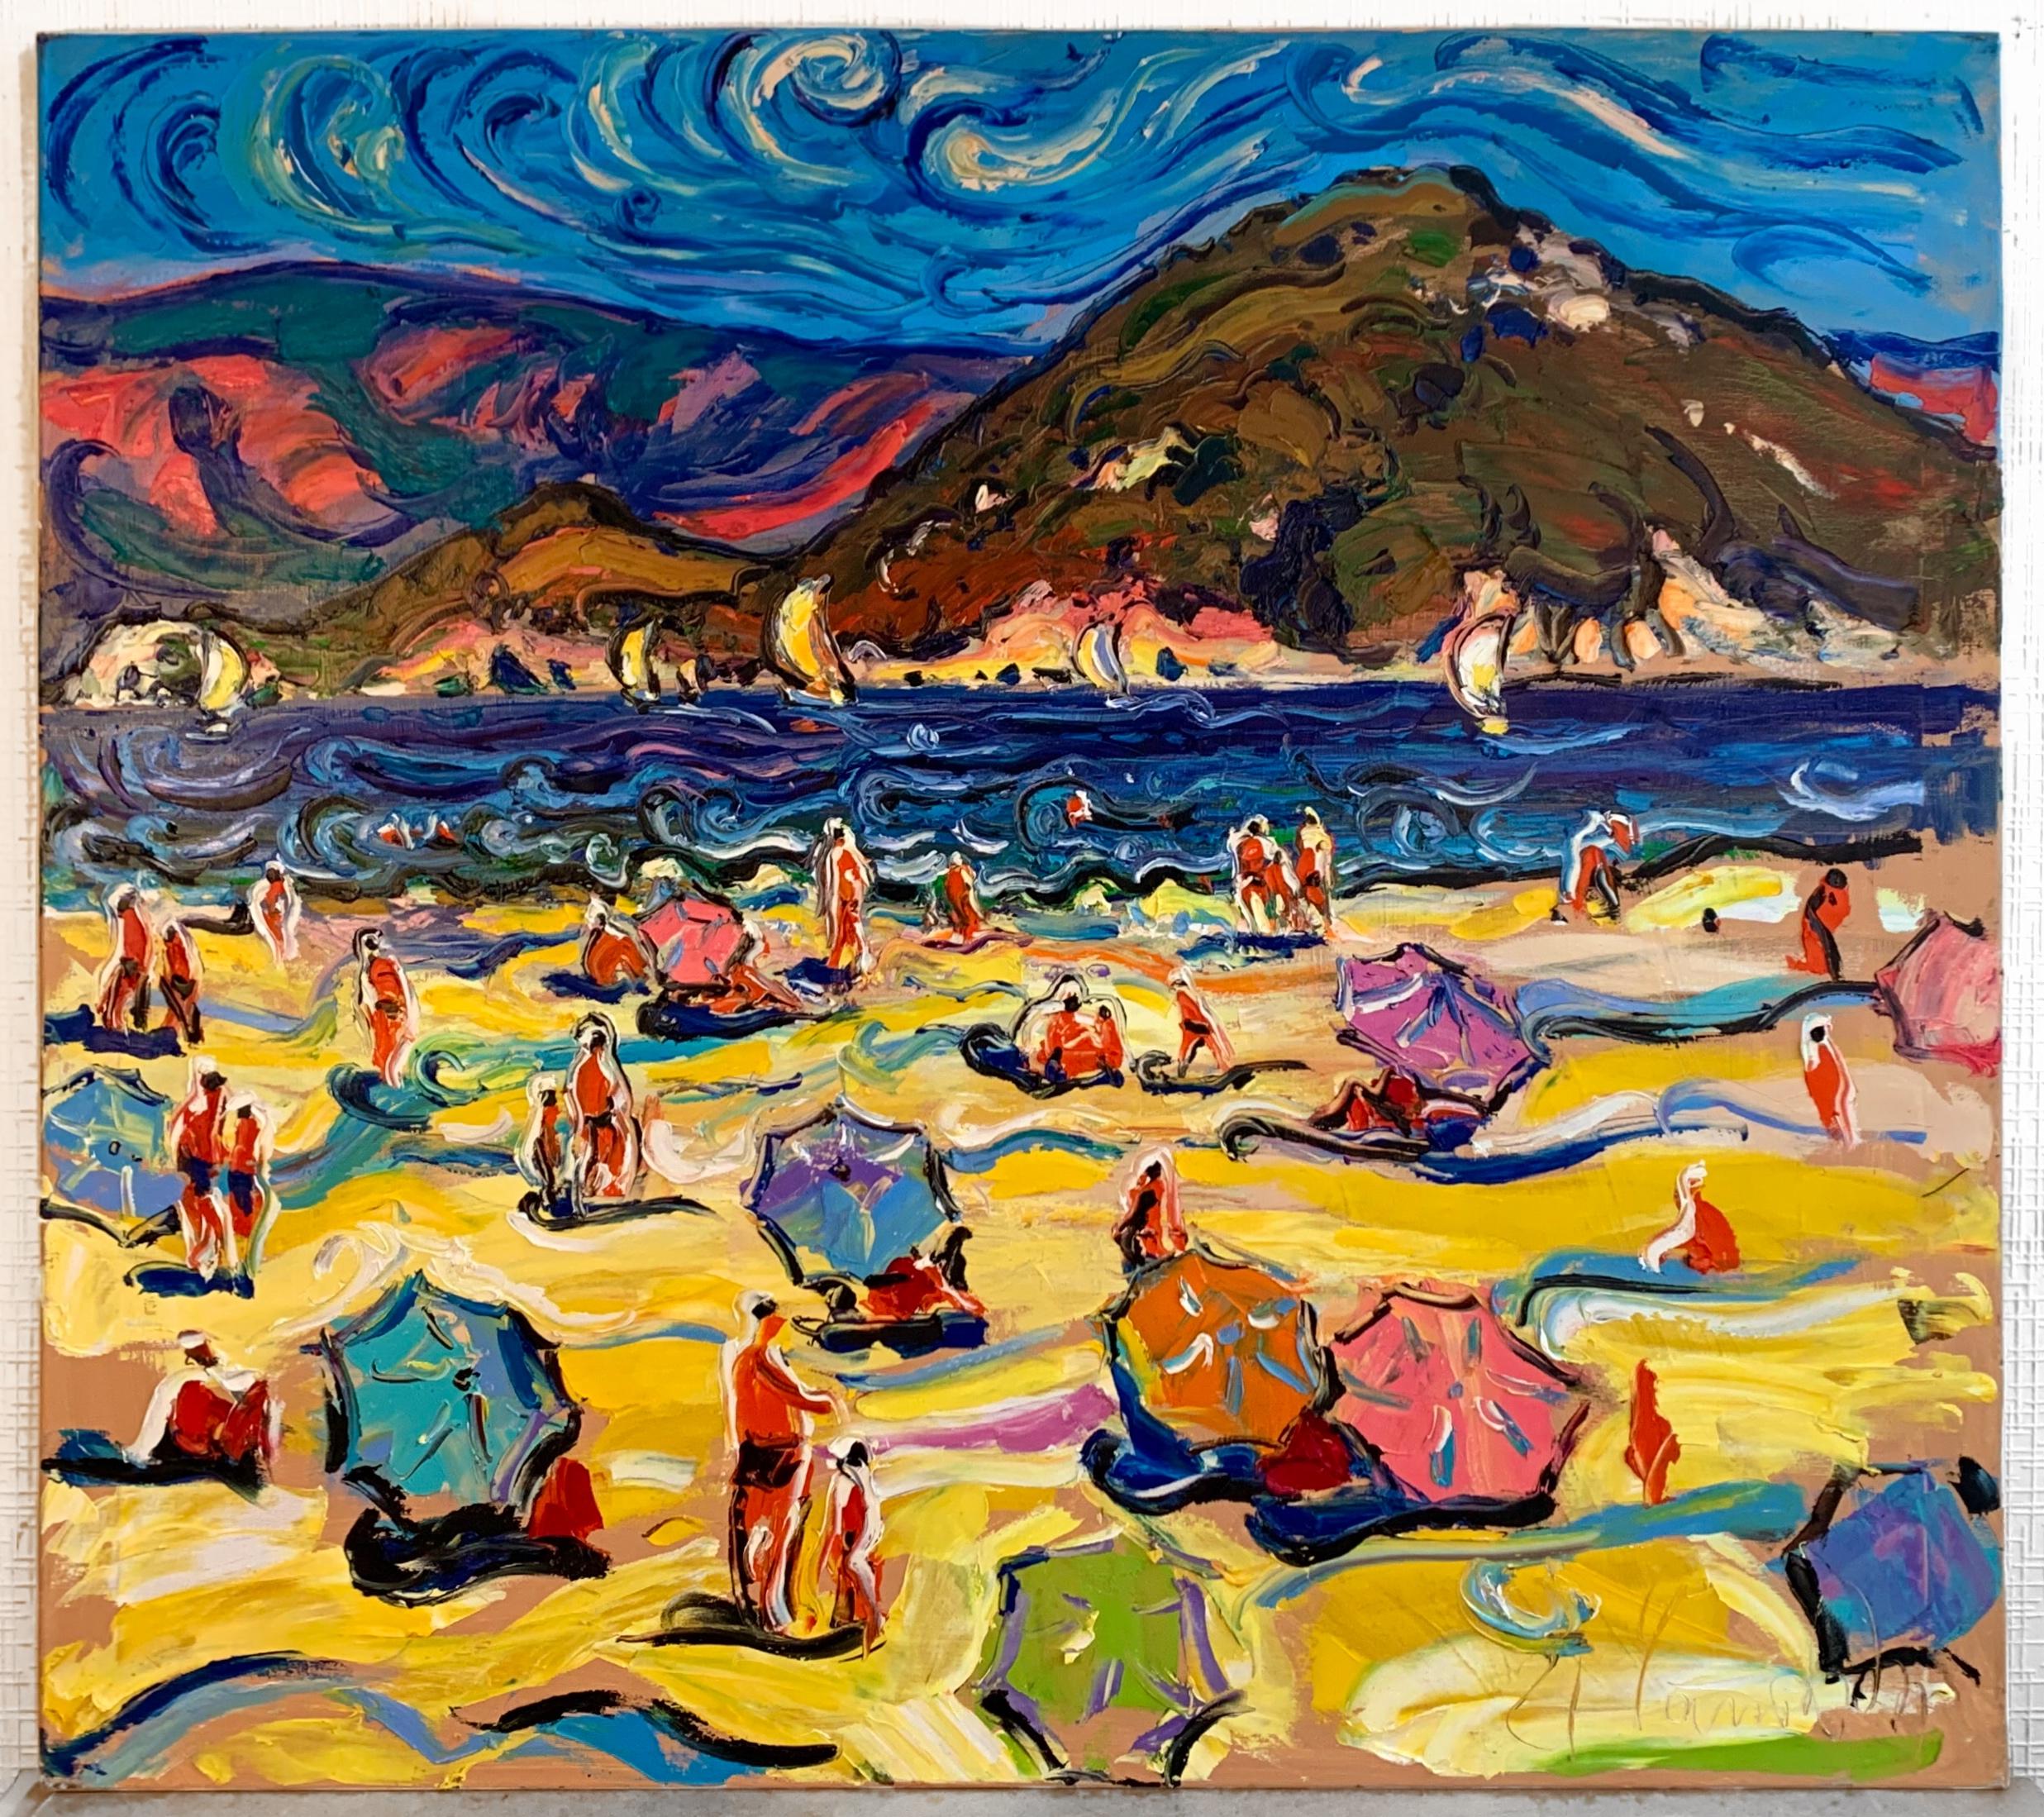 Modern Art Beach Landscape Oil Canvas Framed Seaside Painting by Chebotaru A.
This is a contemporary original artwork by a well known Ukrainian artist Andrey Chebotaru (born in 1984). 
The piece of art was painted in 2021 in Marmaris, Turkey and was